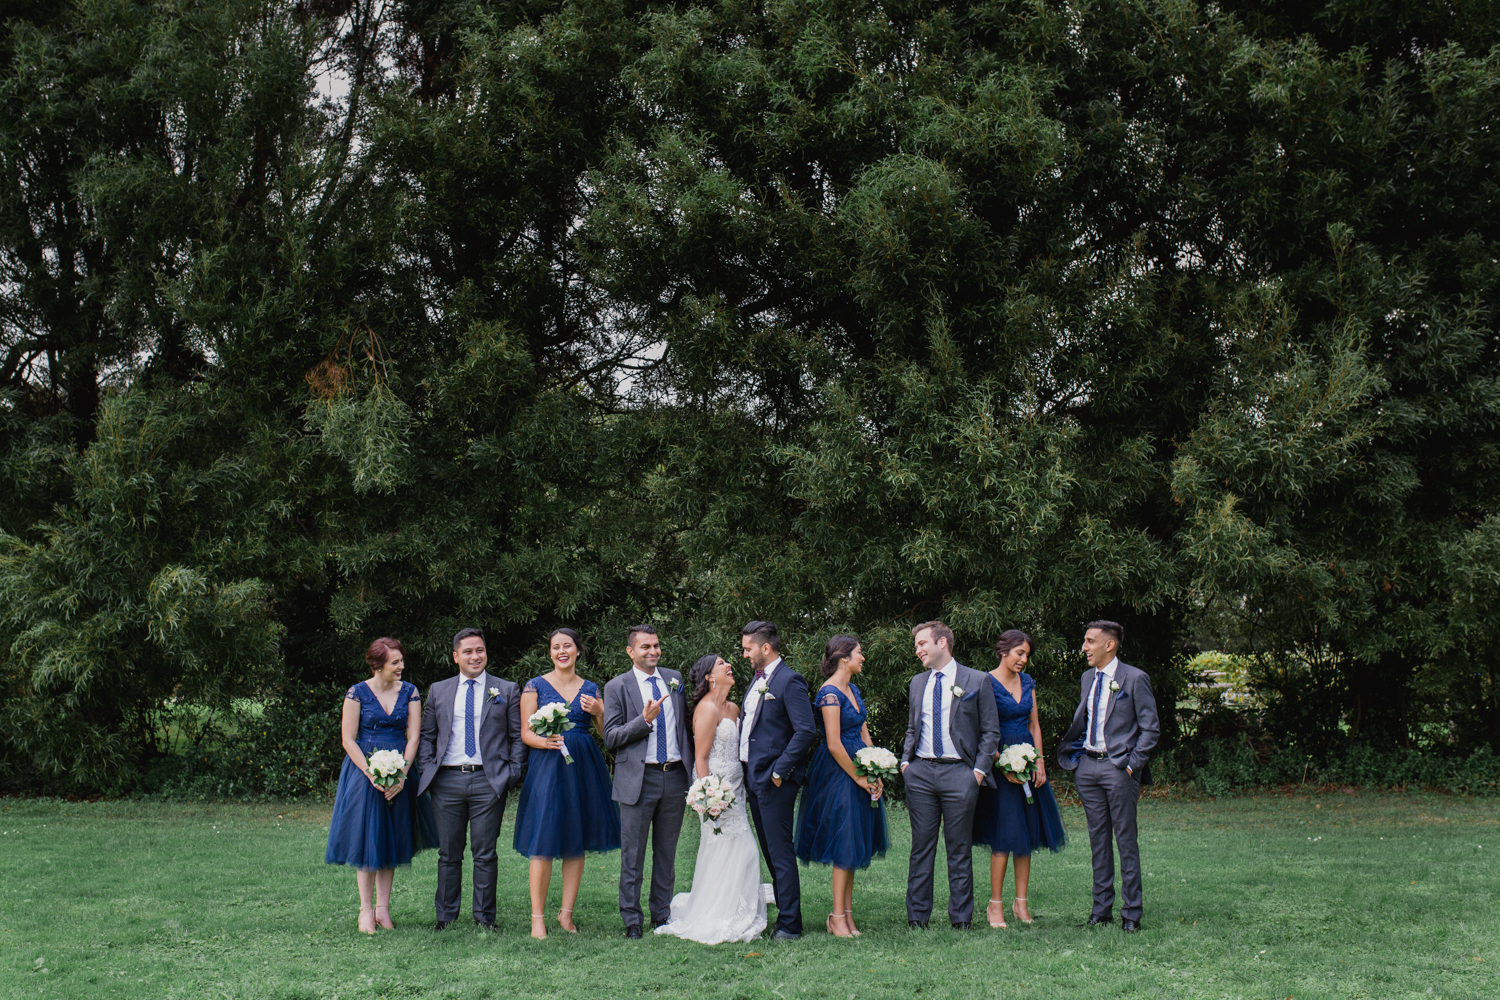 A Bride and Groom with their attendants taken by Mala Photography, an Auckland based wedding photographer. The wedding was at Markovina Vineyard Estate In Kumeu, Auckland.